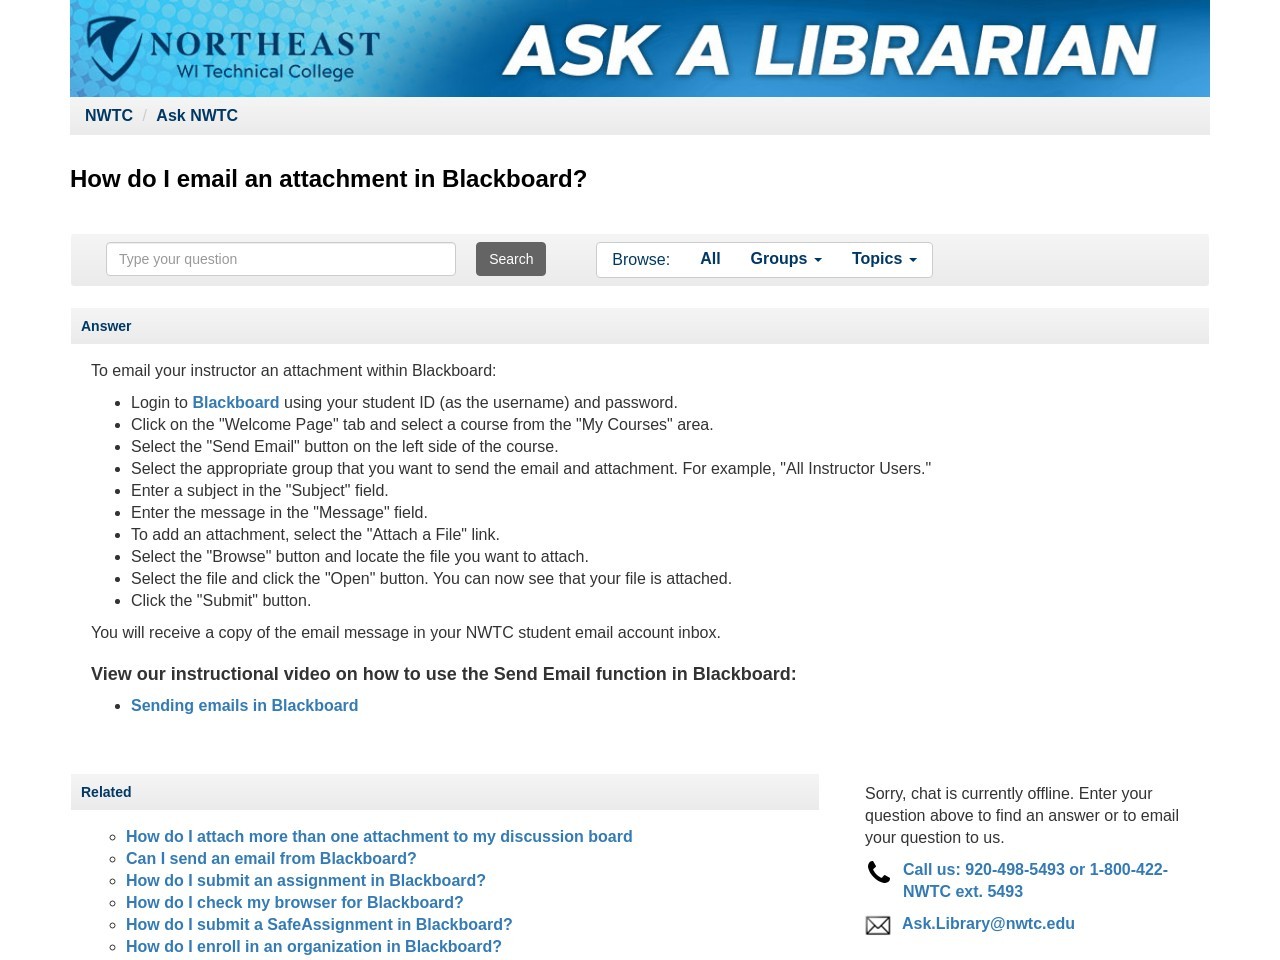 How do I email an attachment in Blackboard? - Ask a Librarian